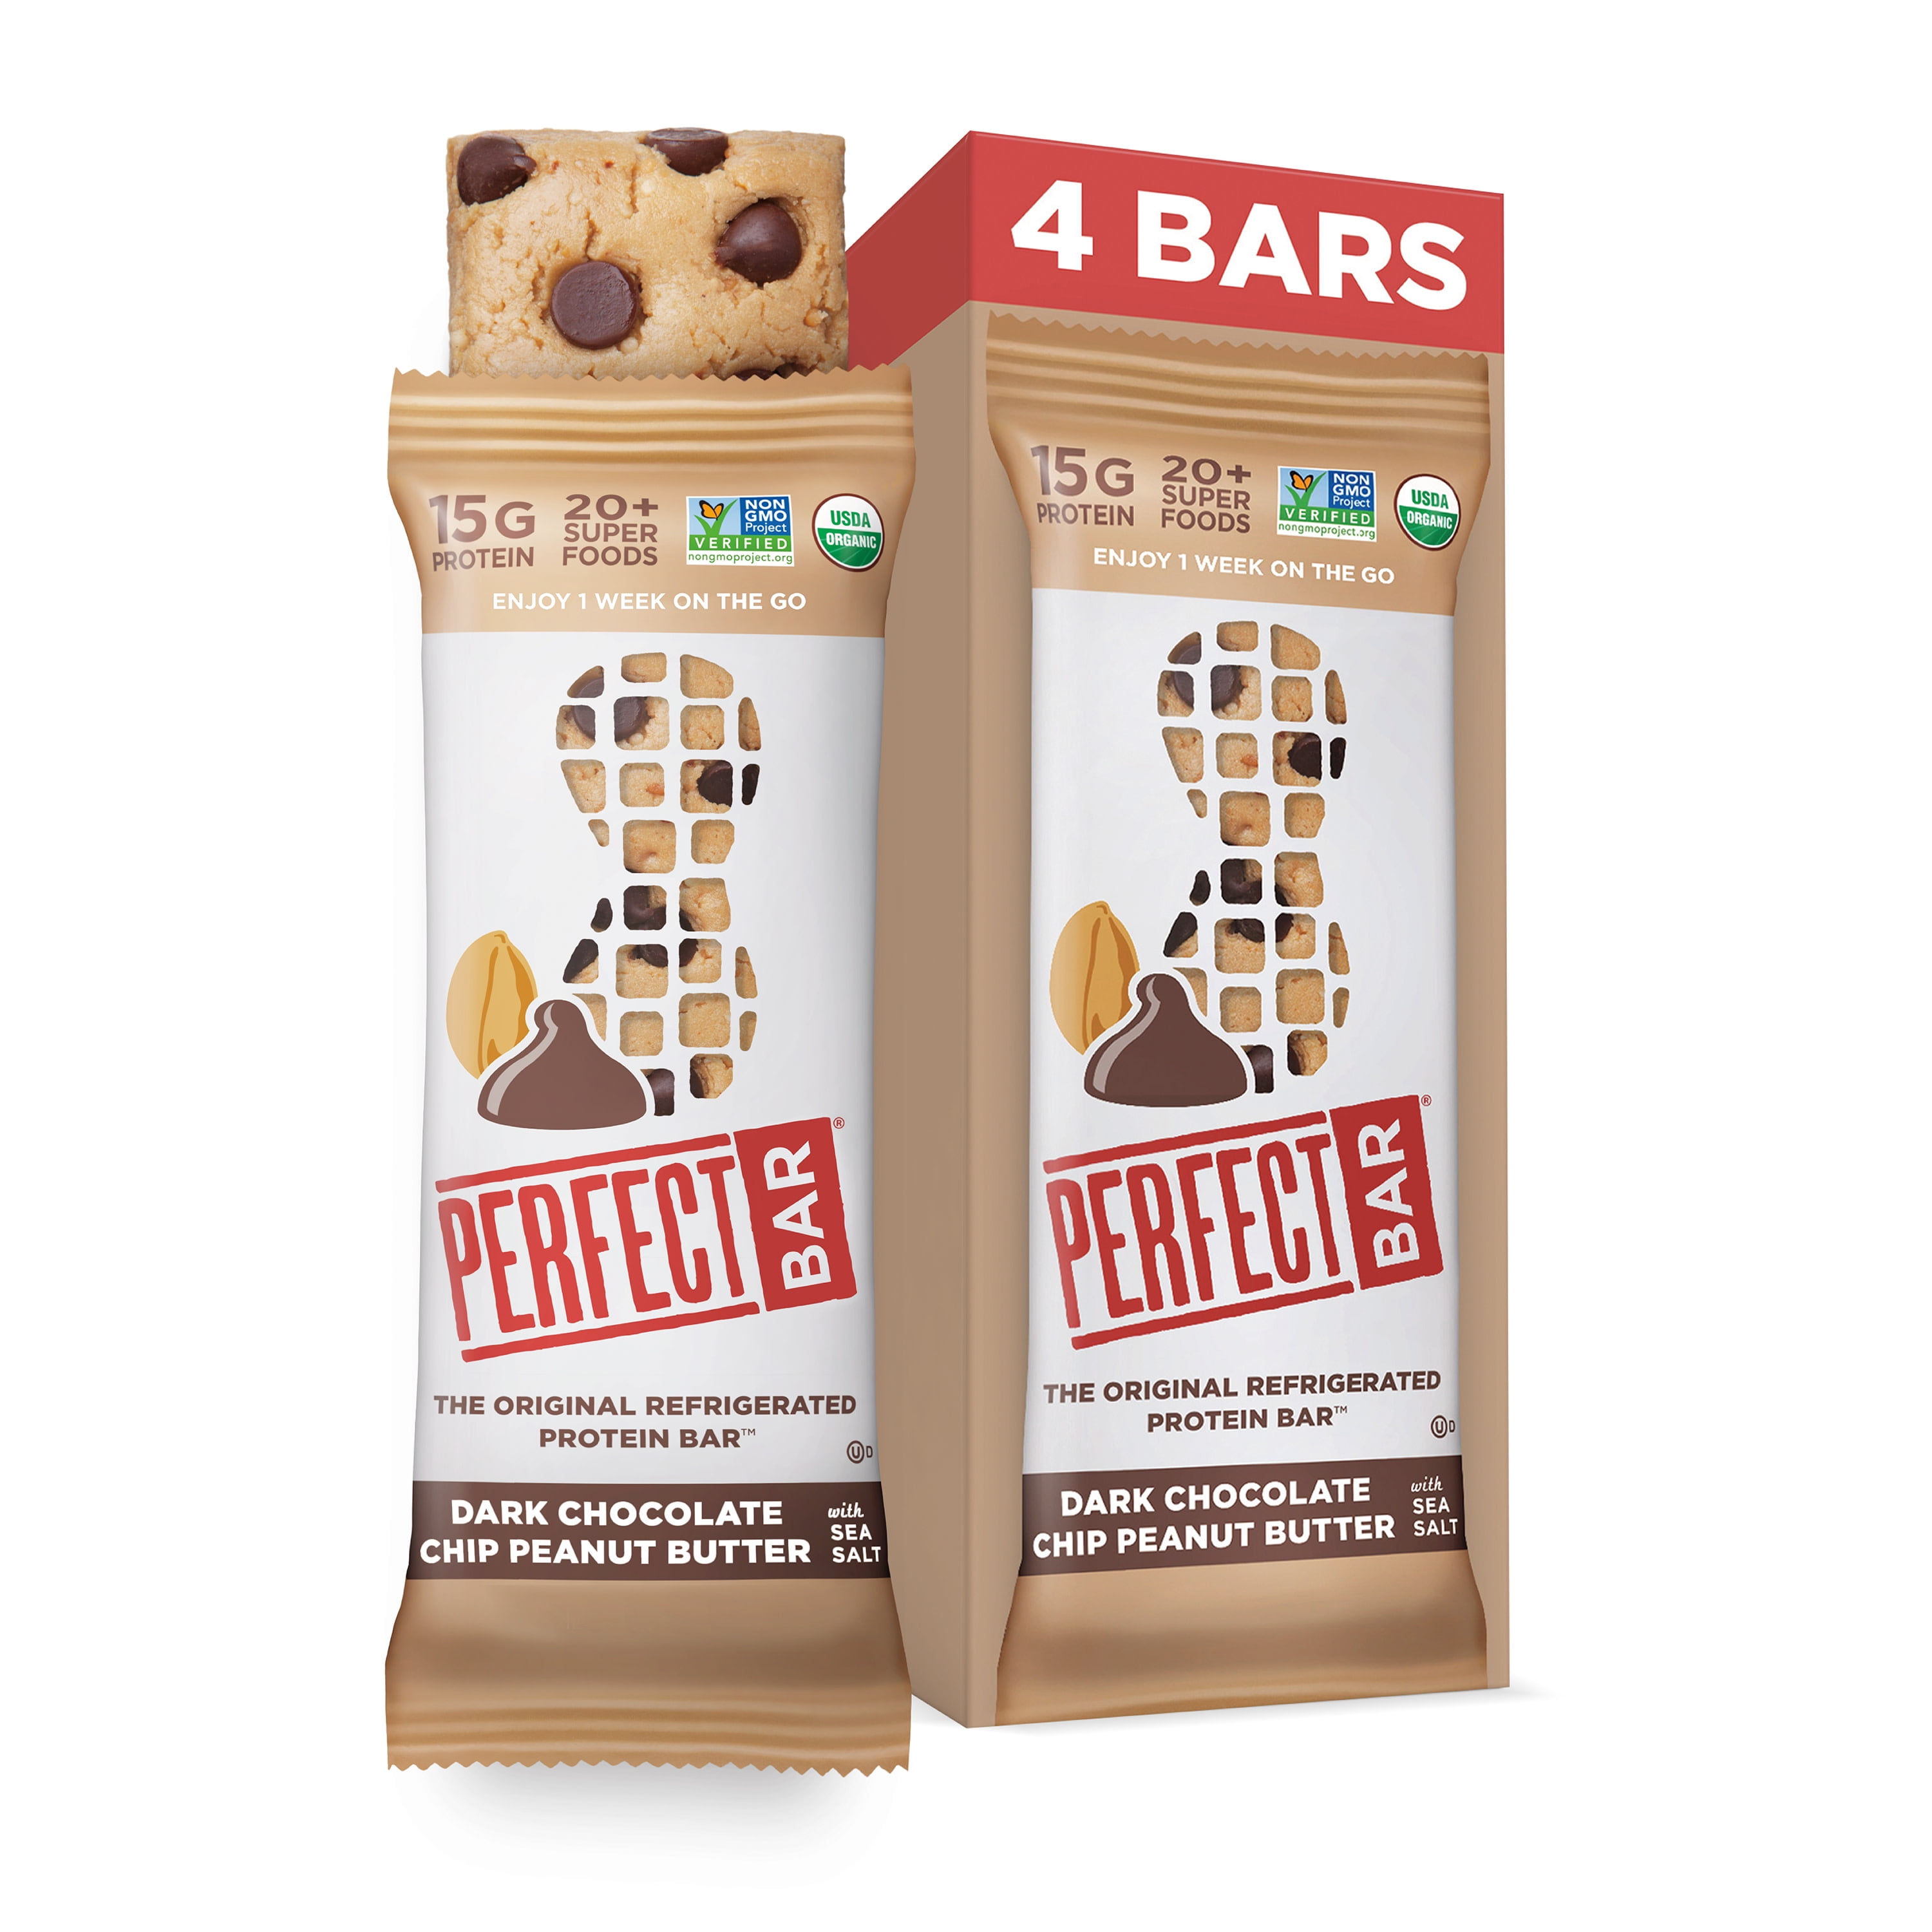 Peanut Butter Chocolate Chip Protein Bar 